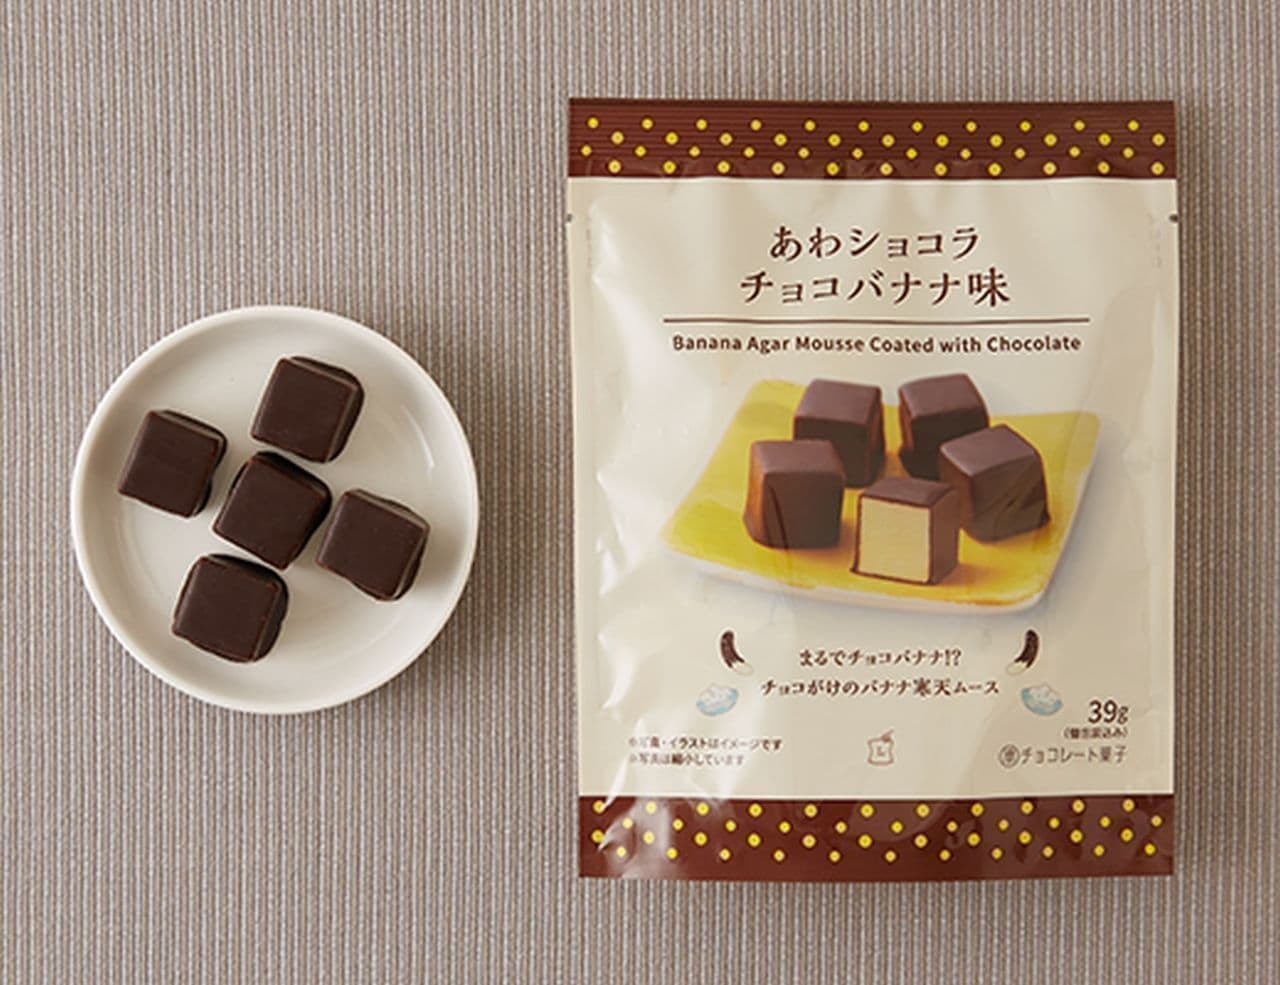 Newly released on December 13th: LAWSON's new sweets.